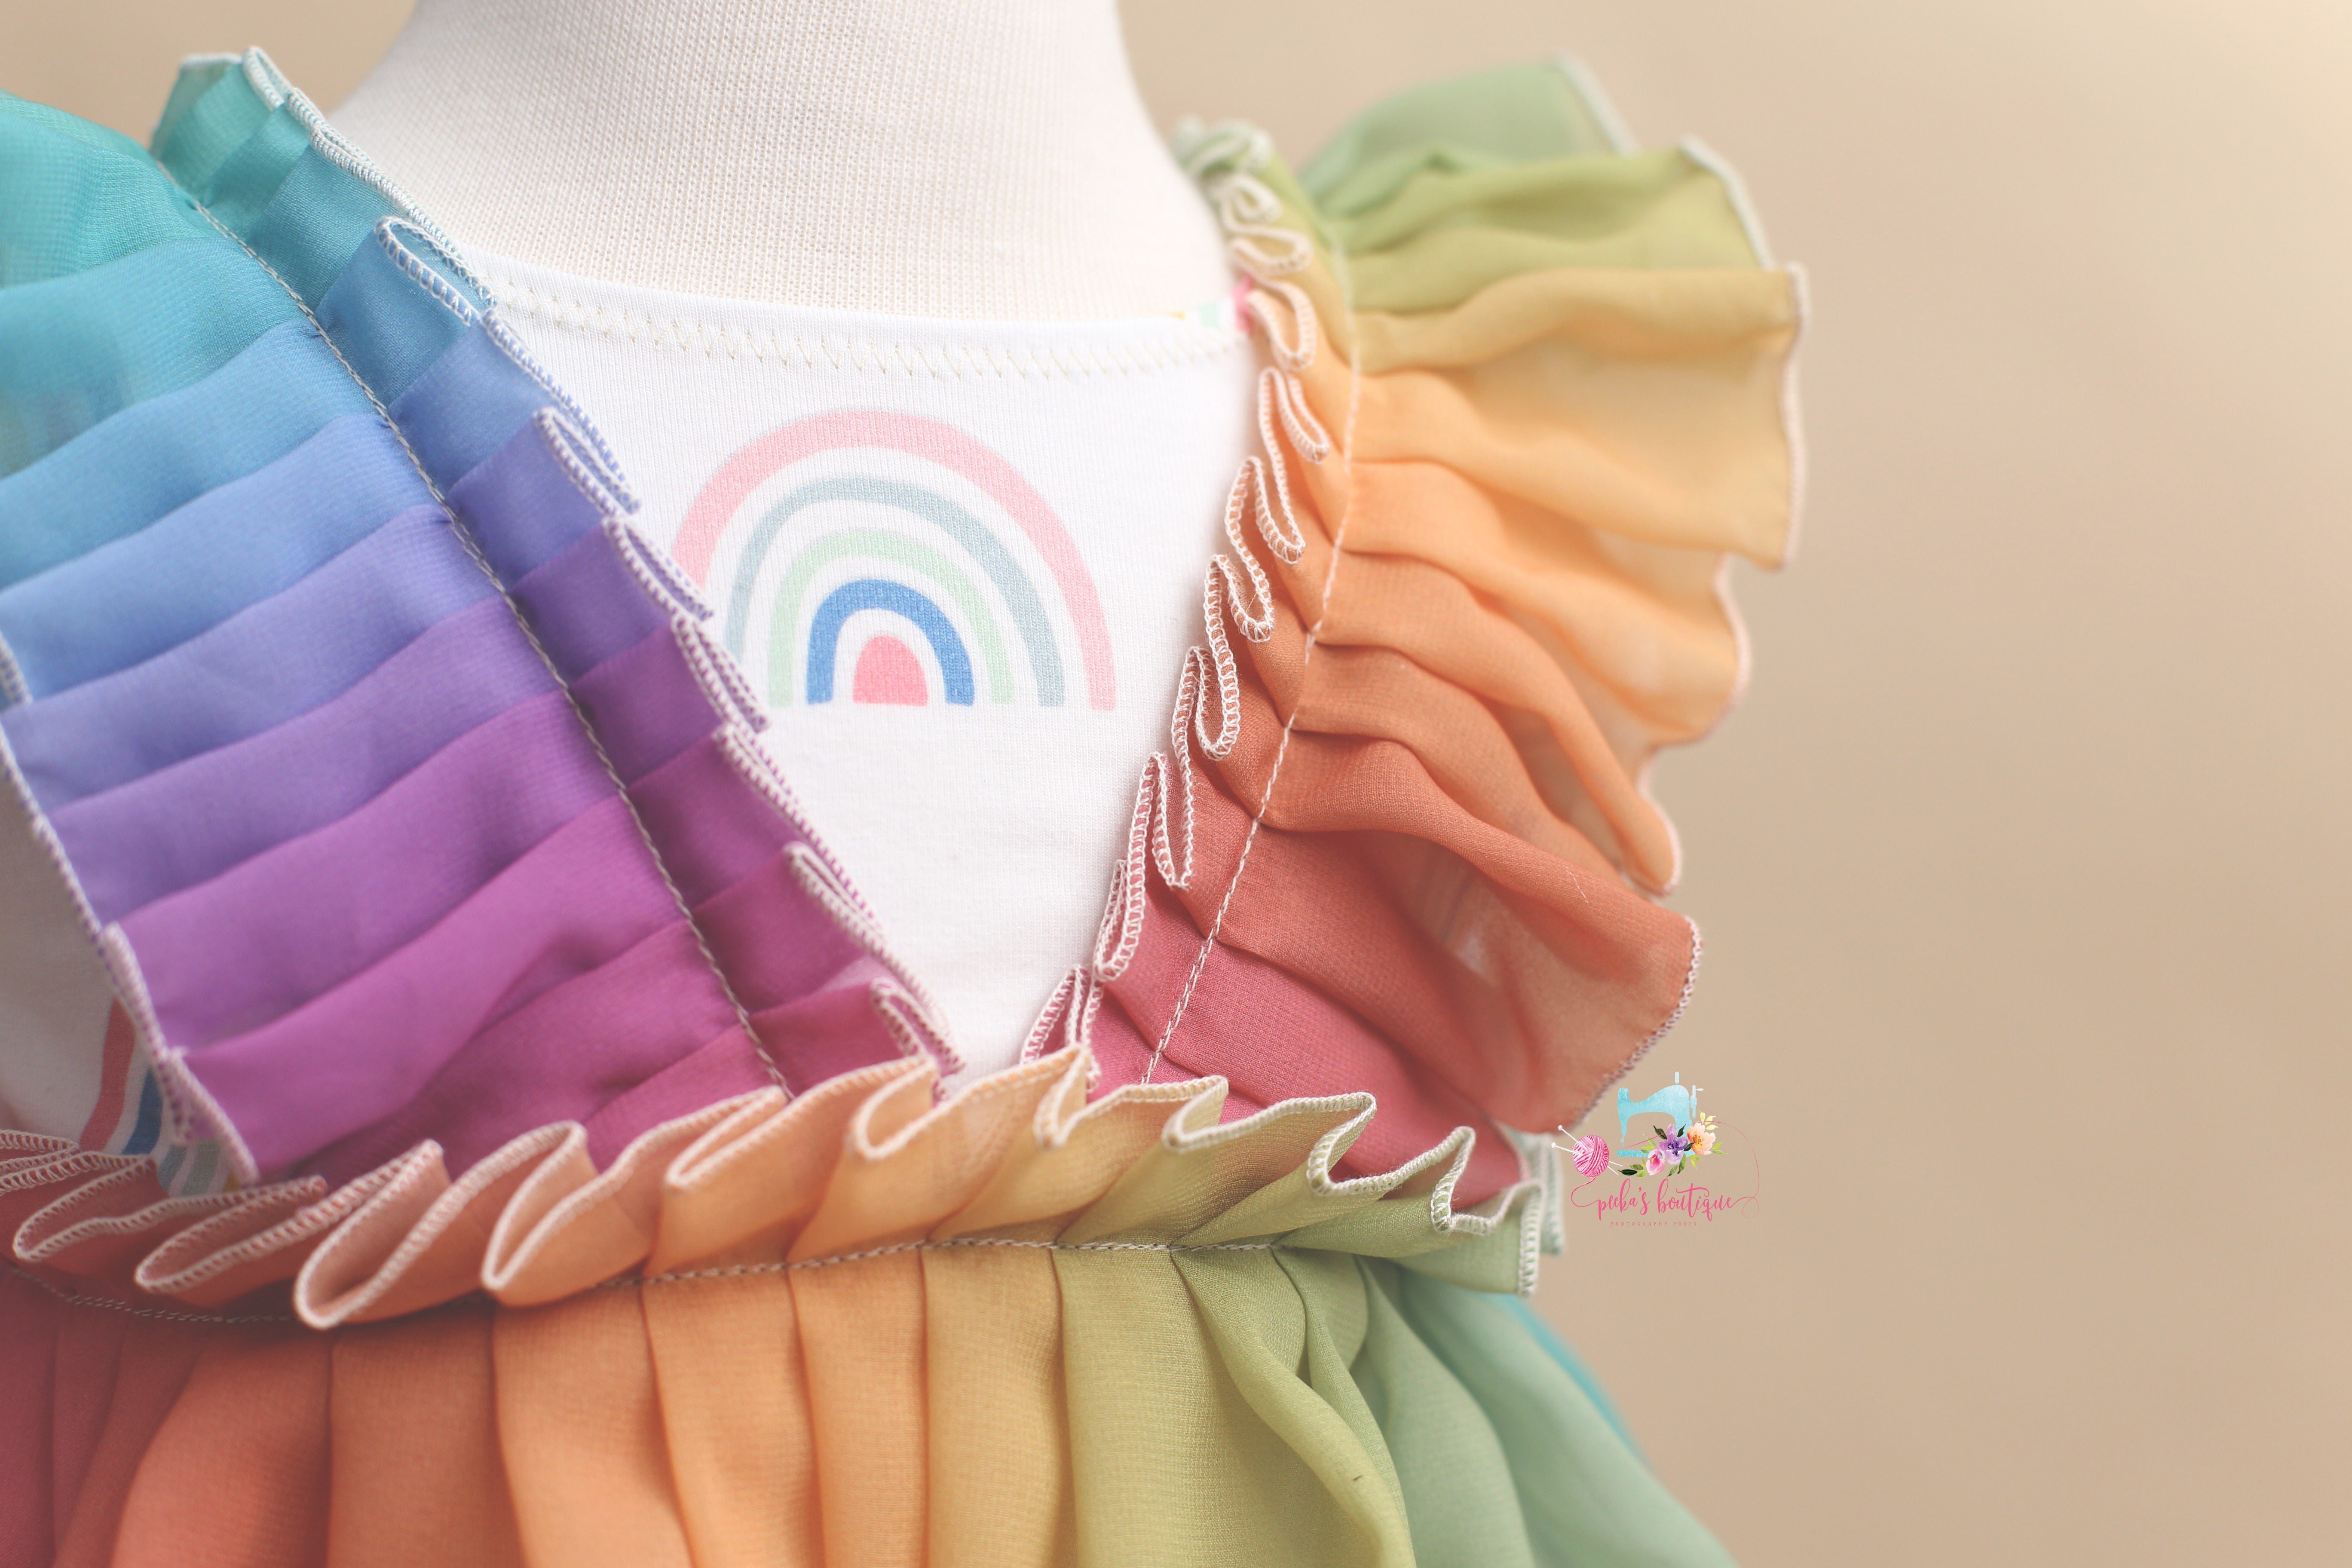 MADE TO ORDER- Kinsley Sitter (6-12 Month) Over the Rainbow Outfit